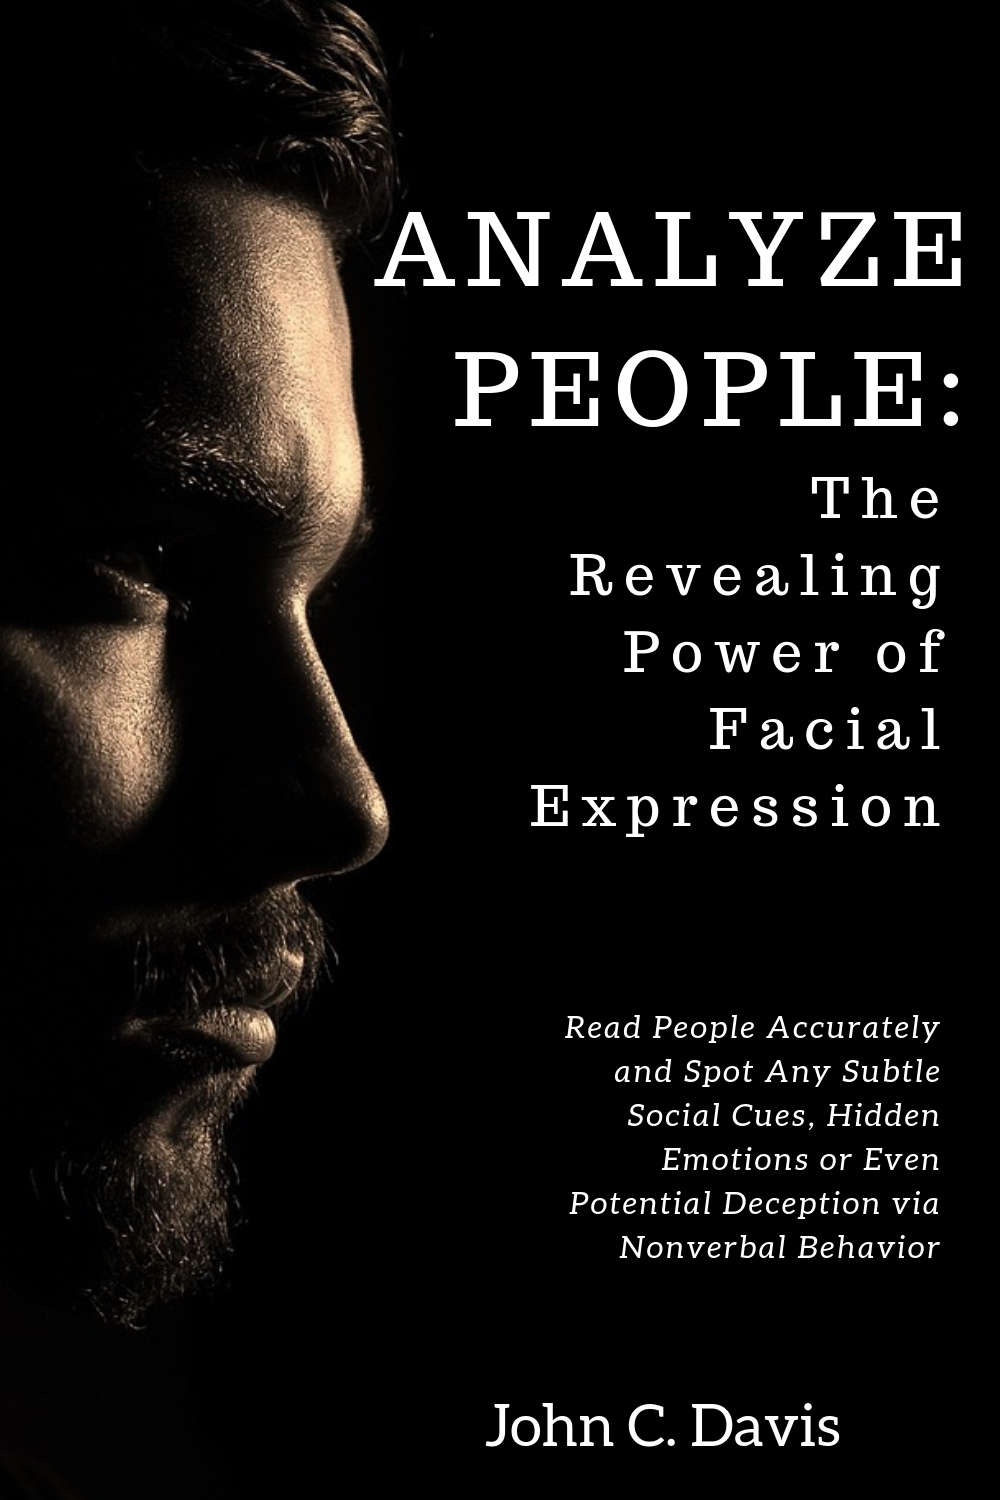 FREE: Analyze people: The revealing power of facial expressions – How to read people accurately and spot any subtle social cues, repressed emotions or even potential deception via nonverbal behavior by John C. Davis